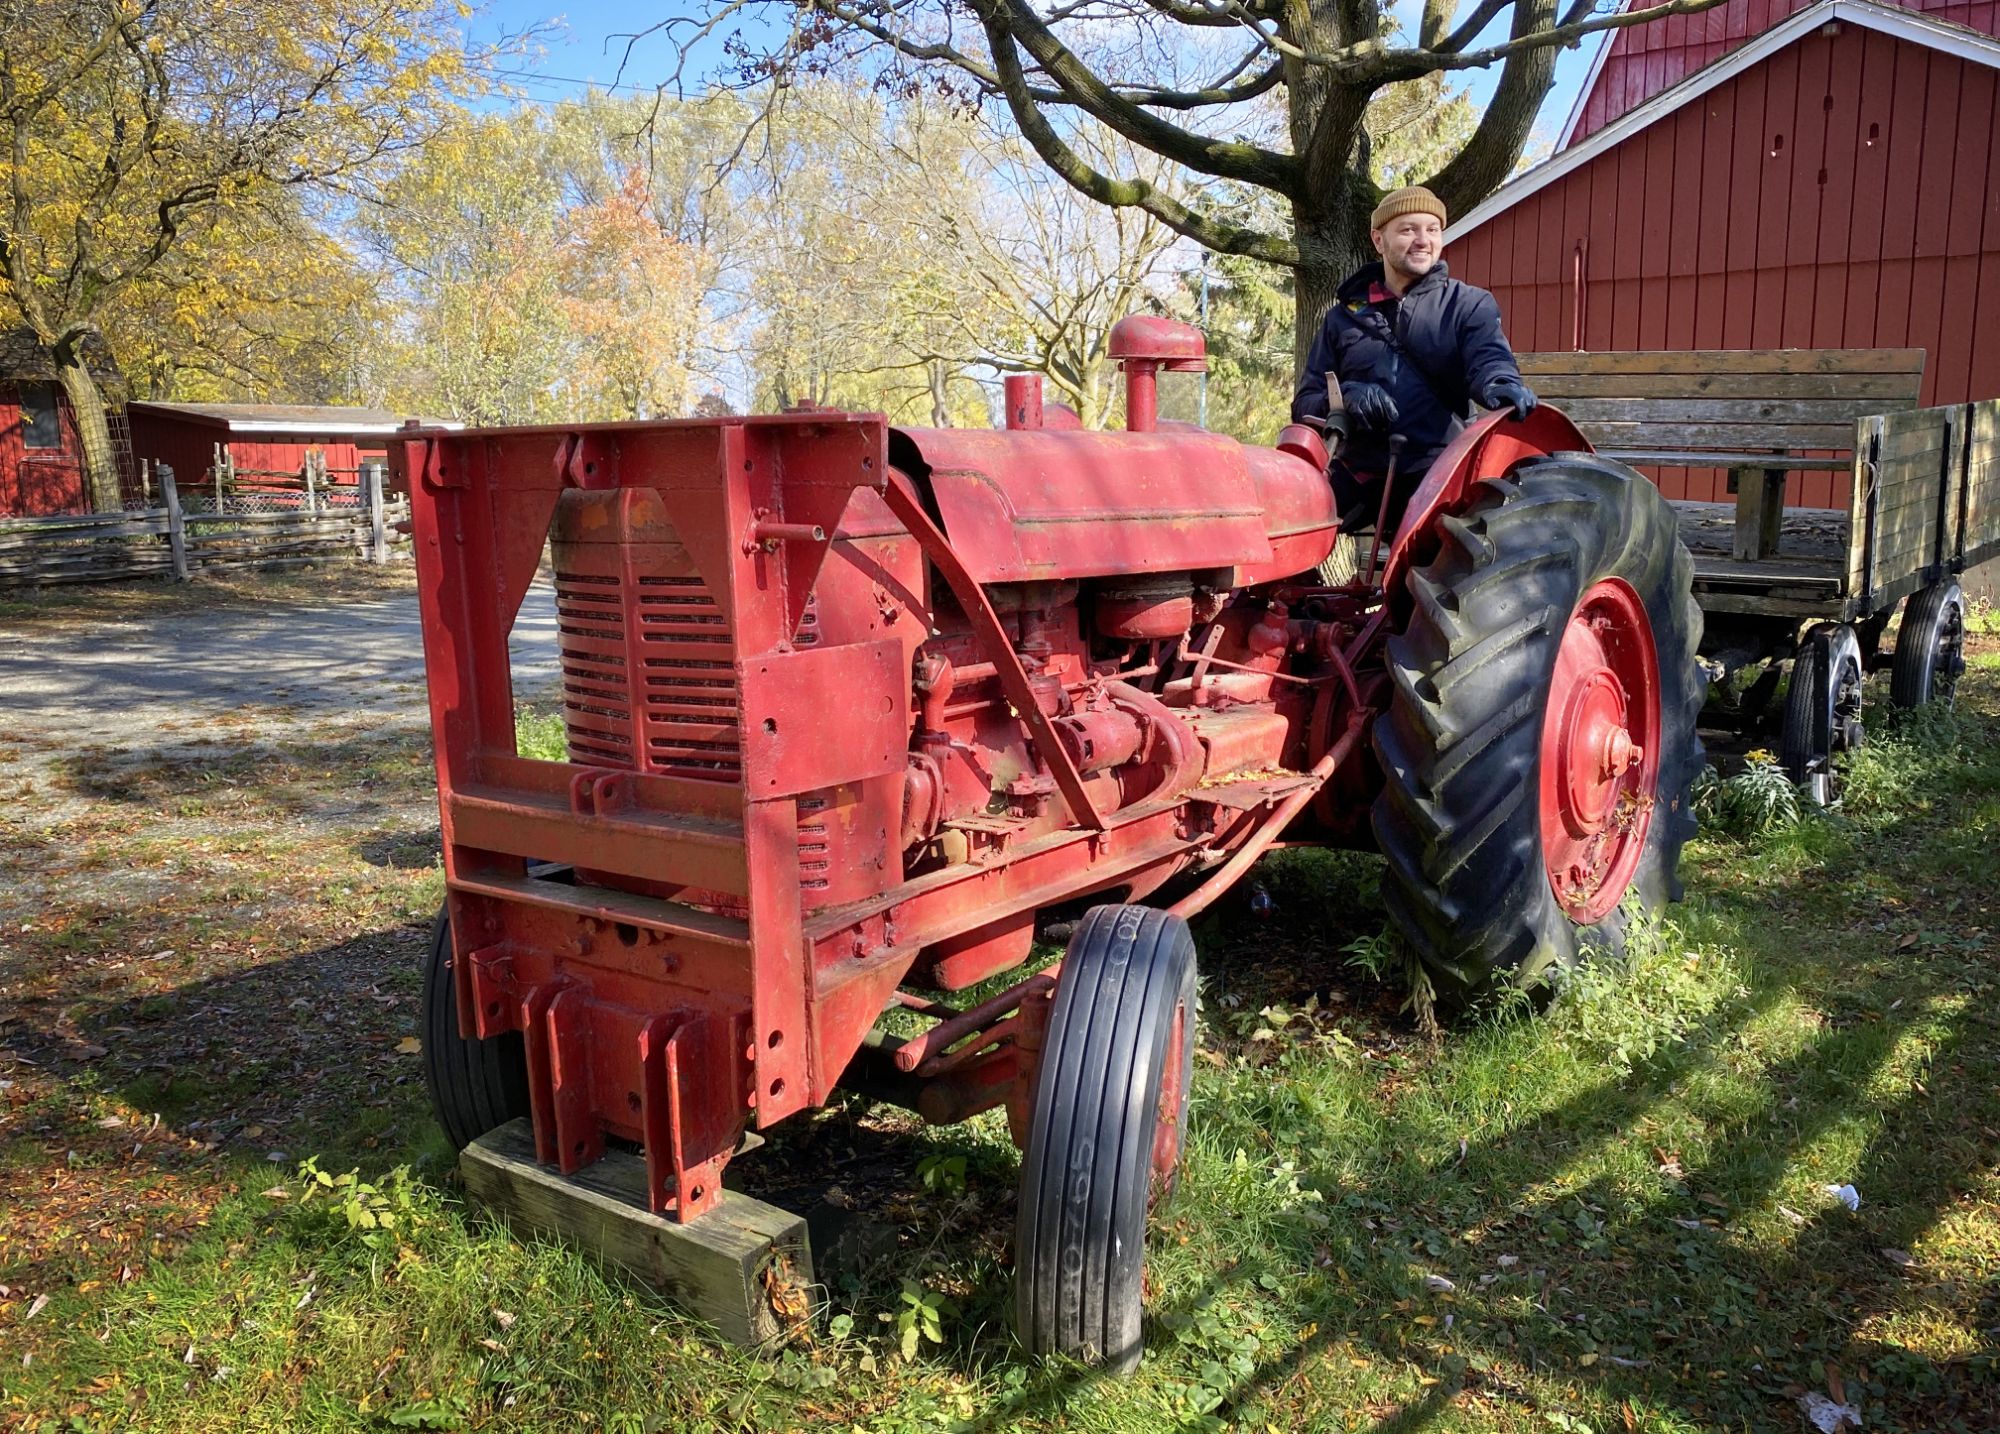 Simon Devost on a vintage tractor, on a crips autumn day.